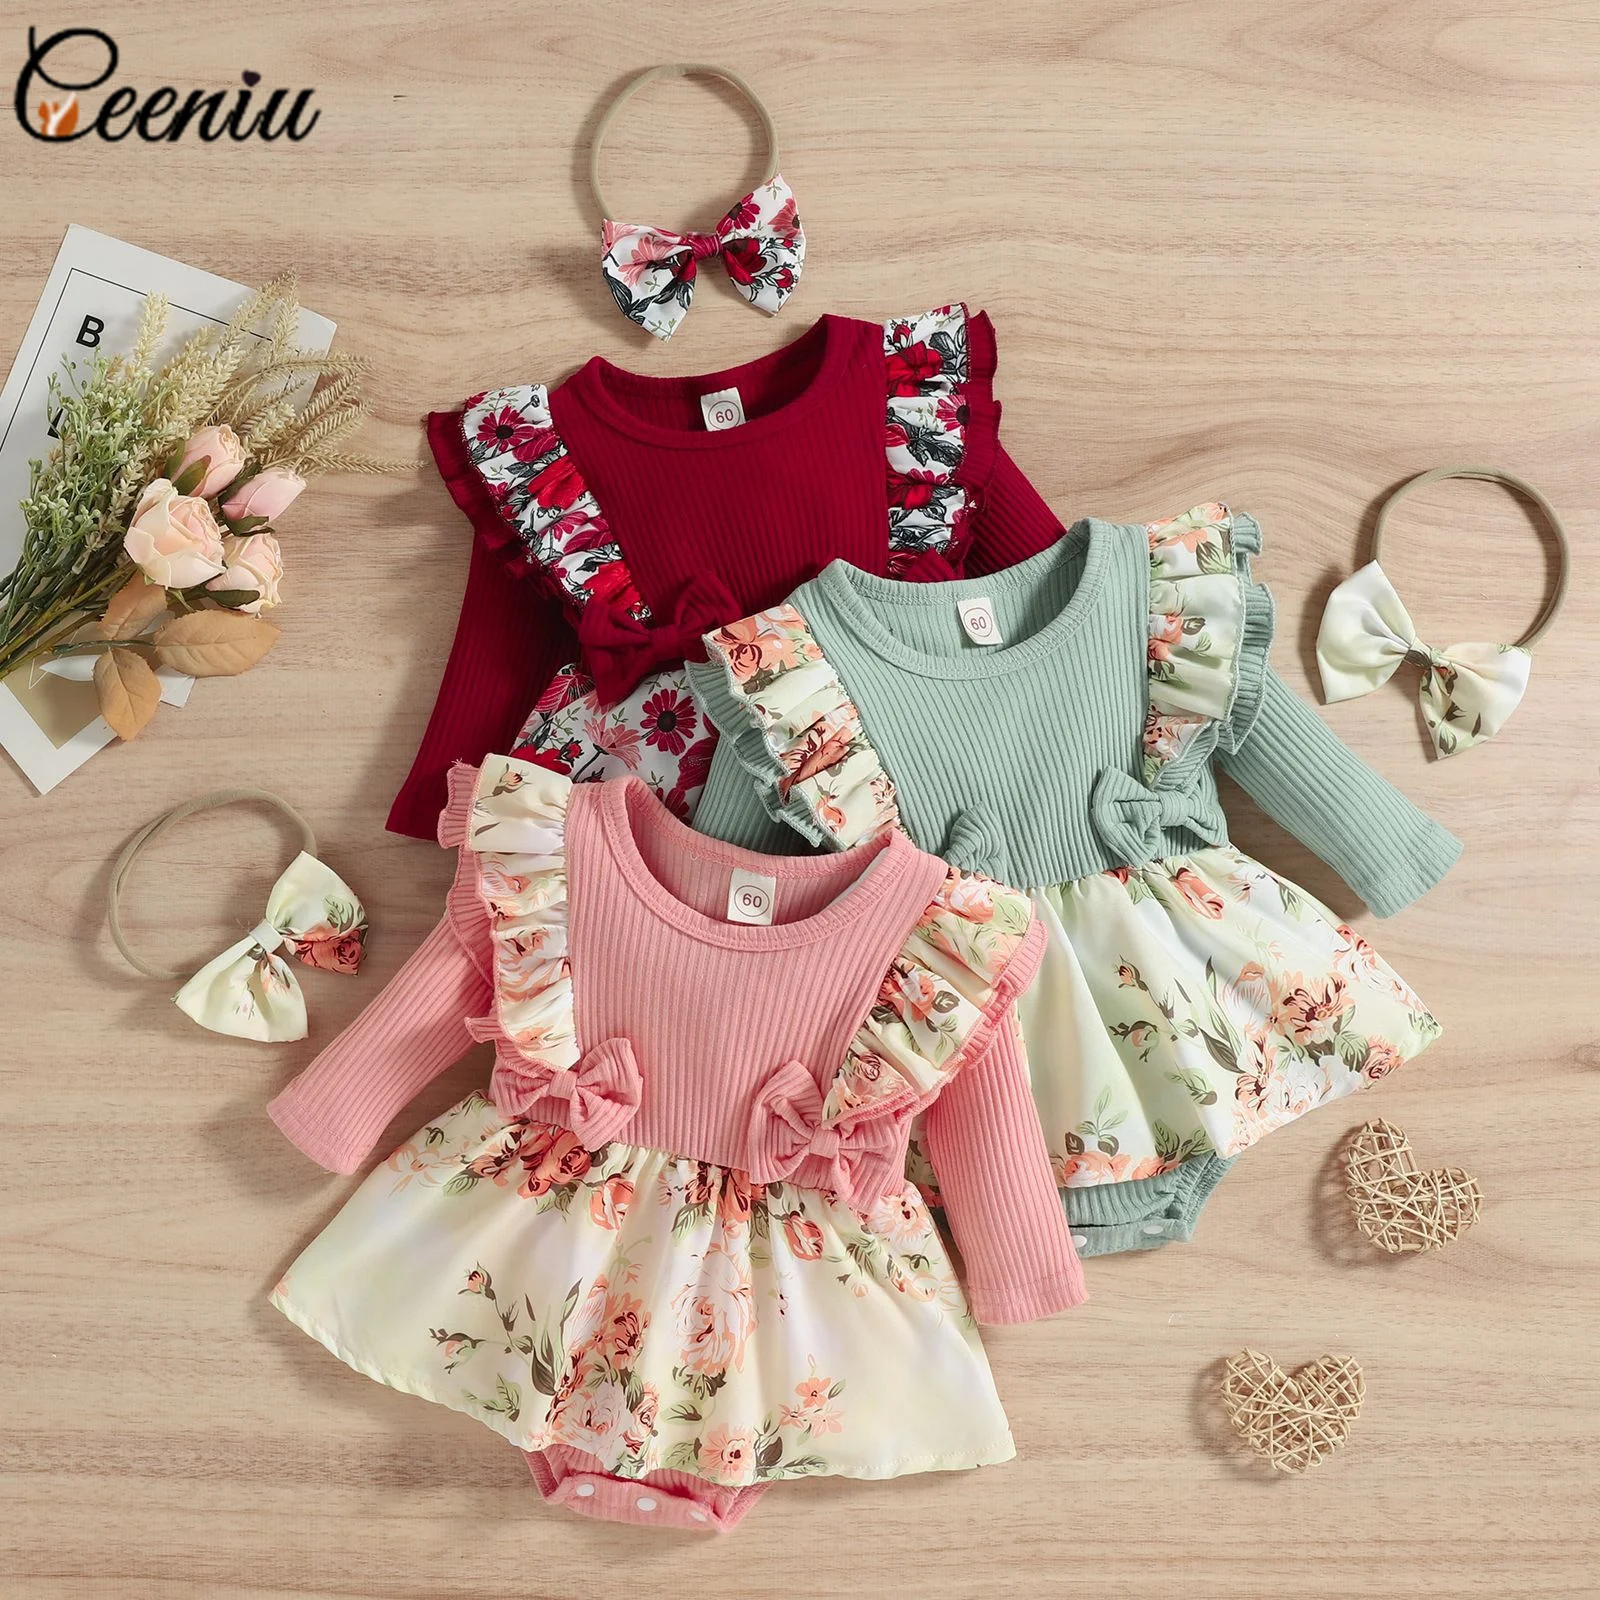 

Ceeniu 0-18M Baby Girl Princess Romper Ruffles Bowknot Small Floral Party Bodysuit Dress For Baby Girl Newborns Festival Clothes